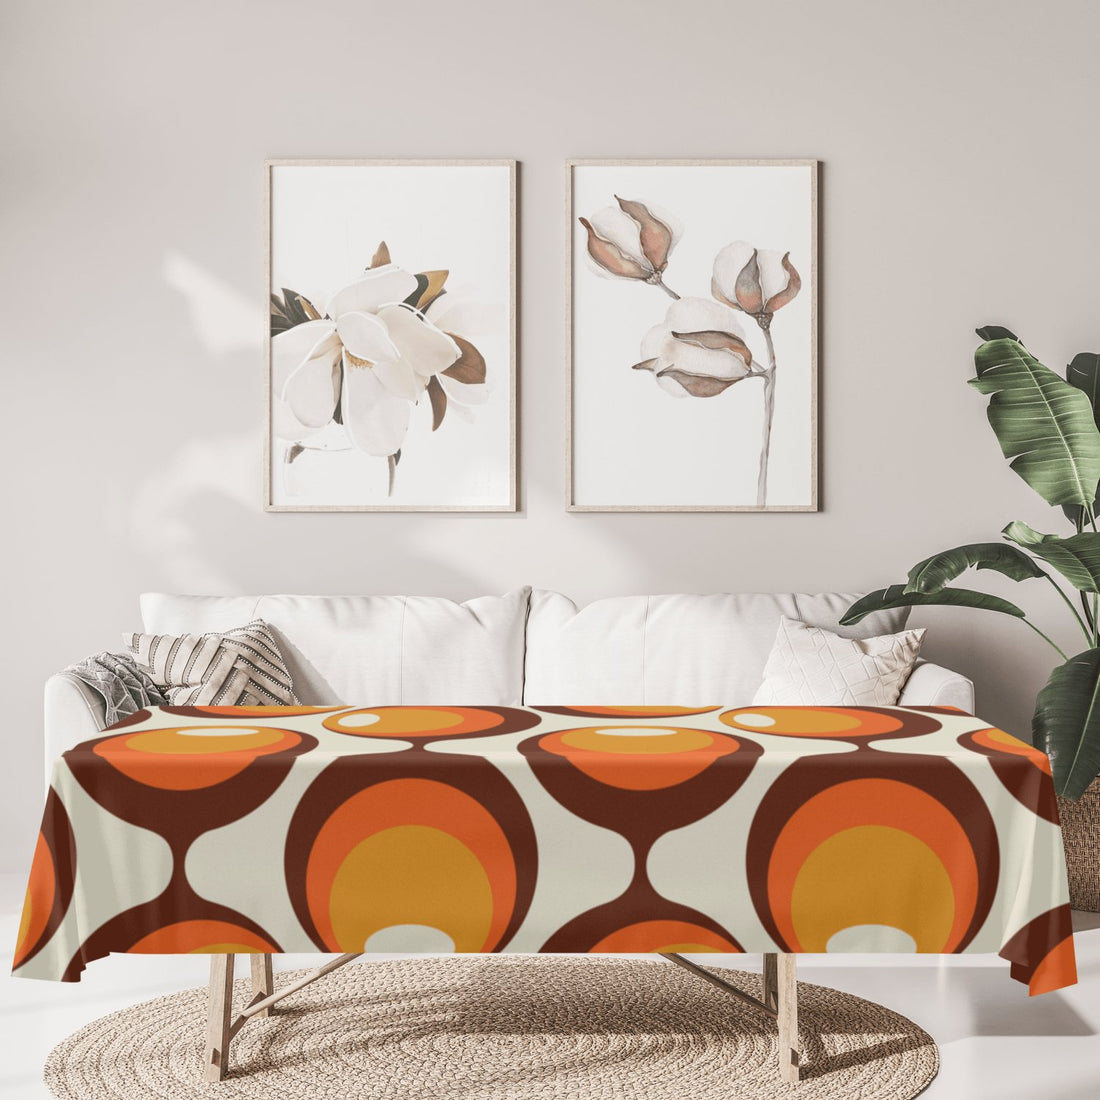 Kate McEnroe New York Mid Century Modern Retro Groovy Orbs Tablecloth, Atomic Age Vintage Style Orange, Brown, Yellow Table LinensTablecloths108350